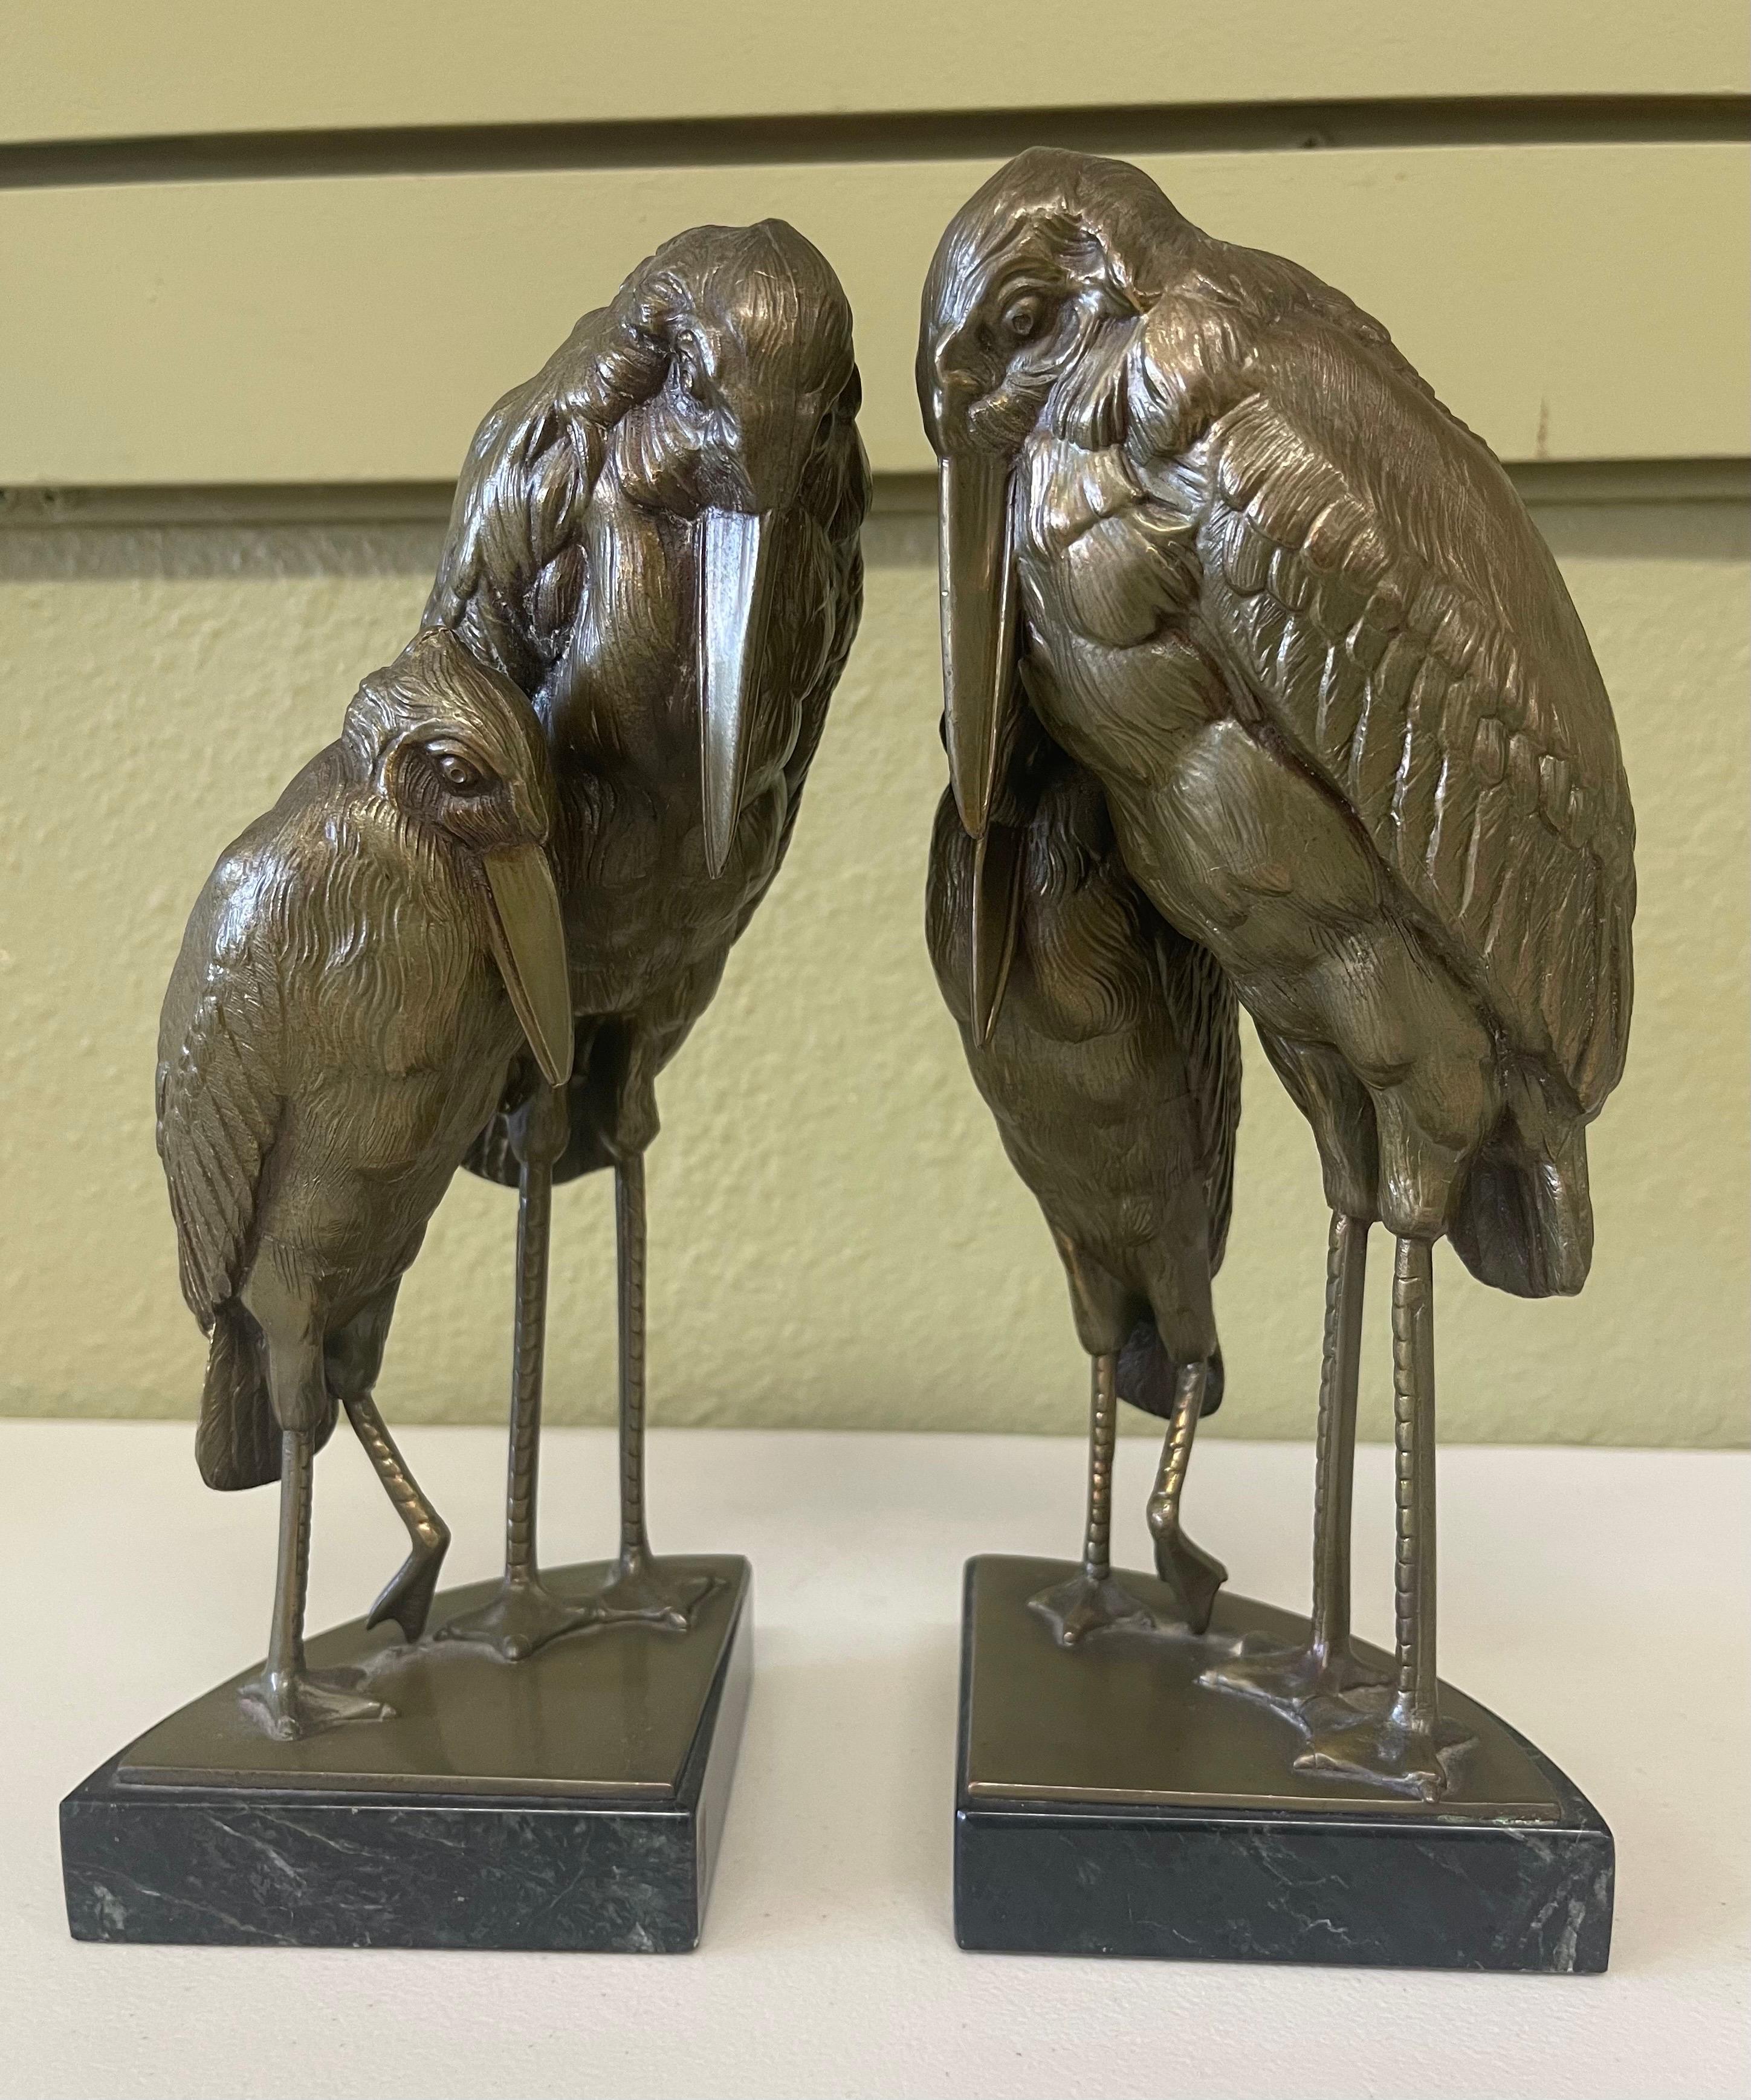 Gorgeous pair of marabou stork Art Deco bookends in the style of Marcel-Andre’ Bouraine, circa 1930s. The bookends are made of bronze on black marble bases with two cast bronze stork figures in the “Vienna Bronze” style. The large birds measure 7.5